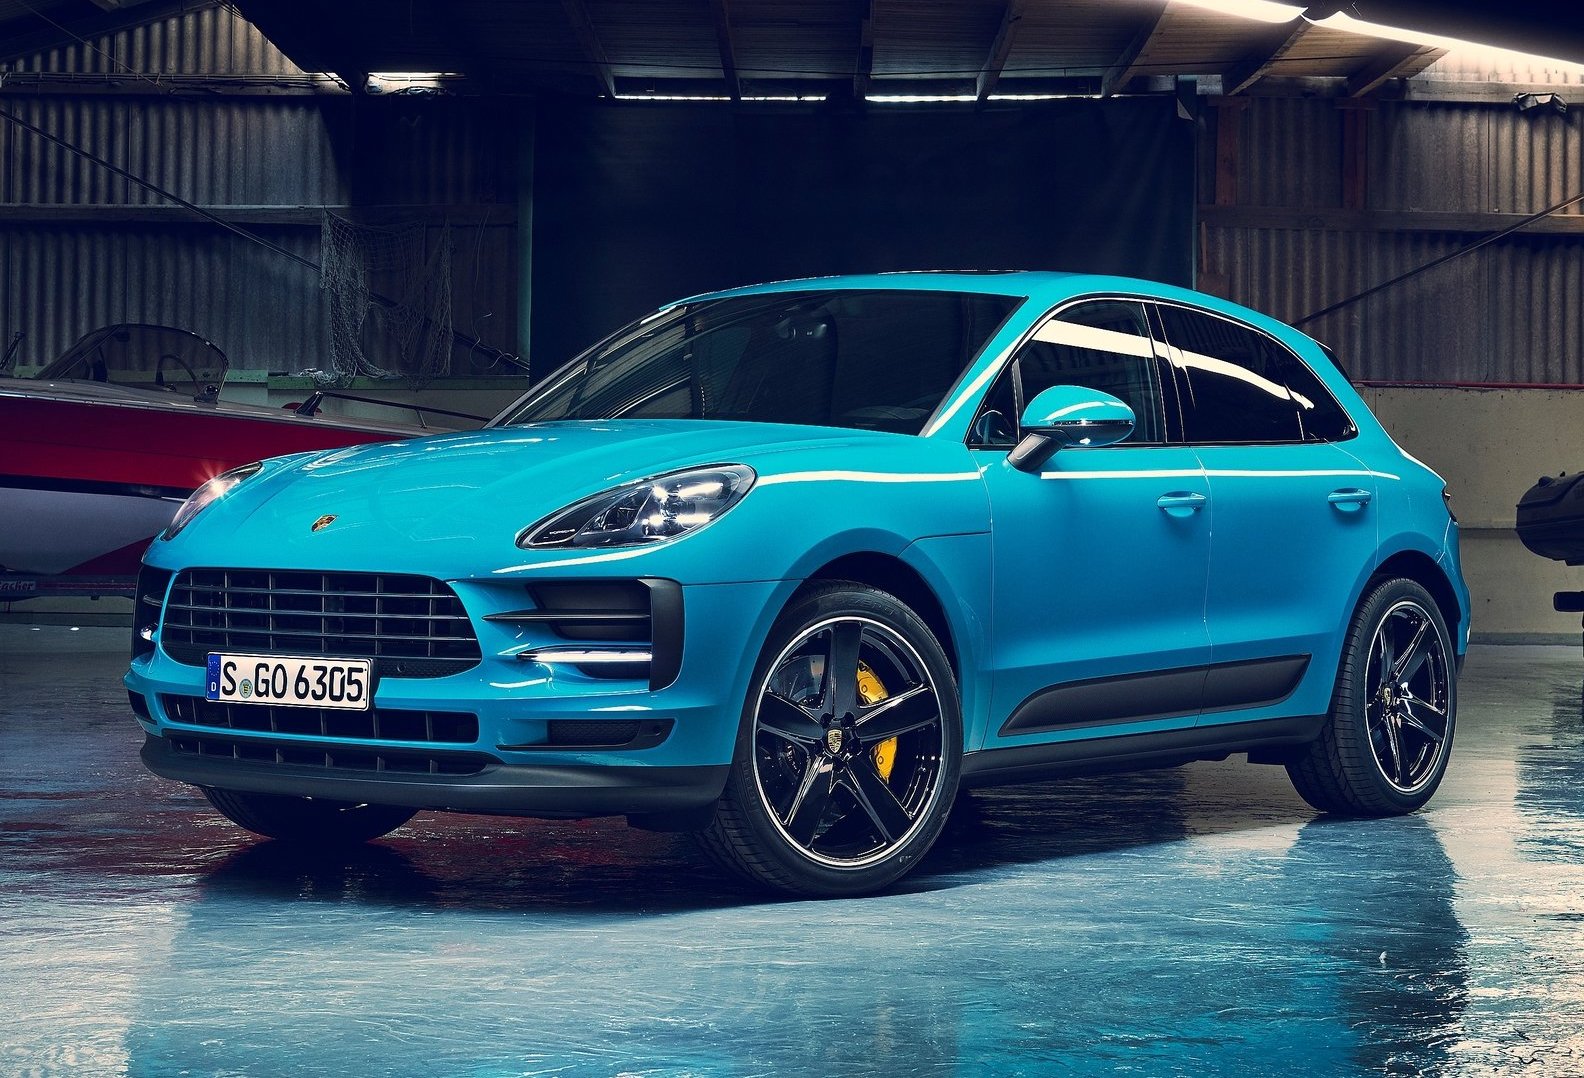 2019 Porsche Macan unveiled with updated tech